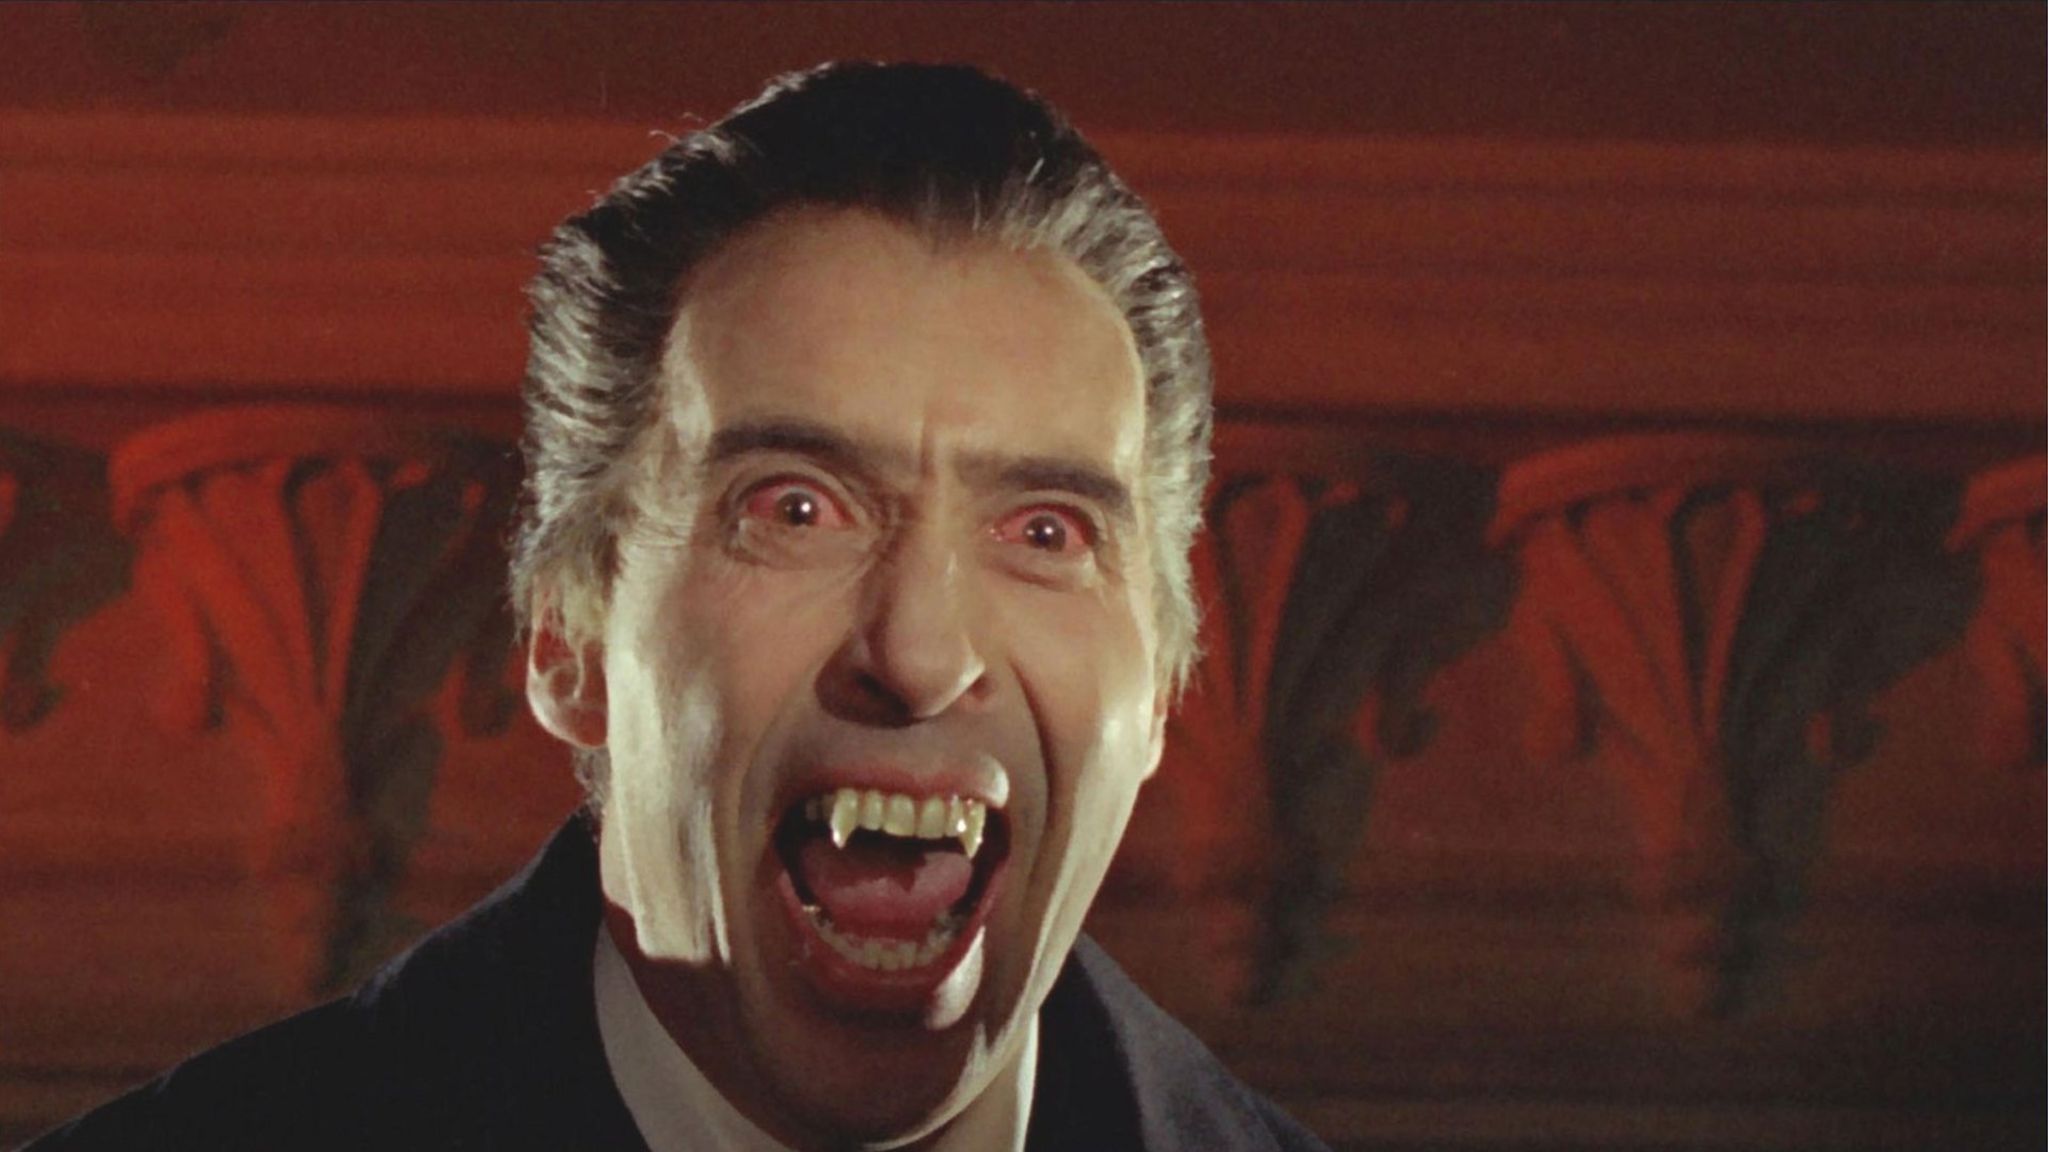 Christopher Lee in role of Dracula